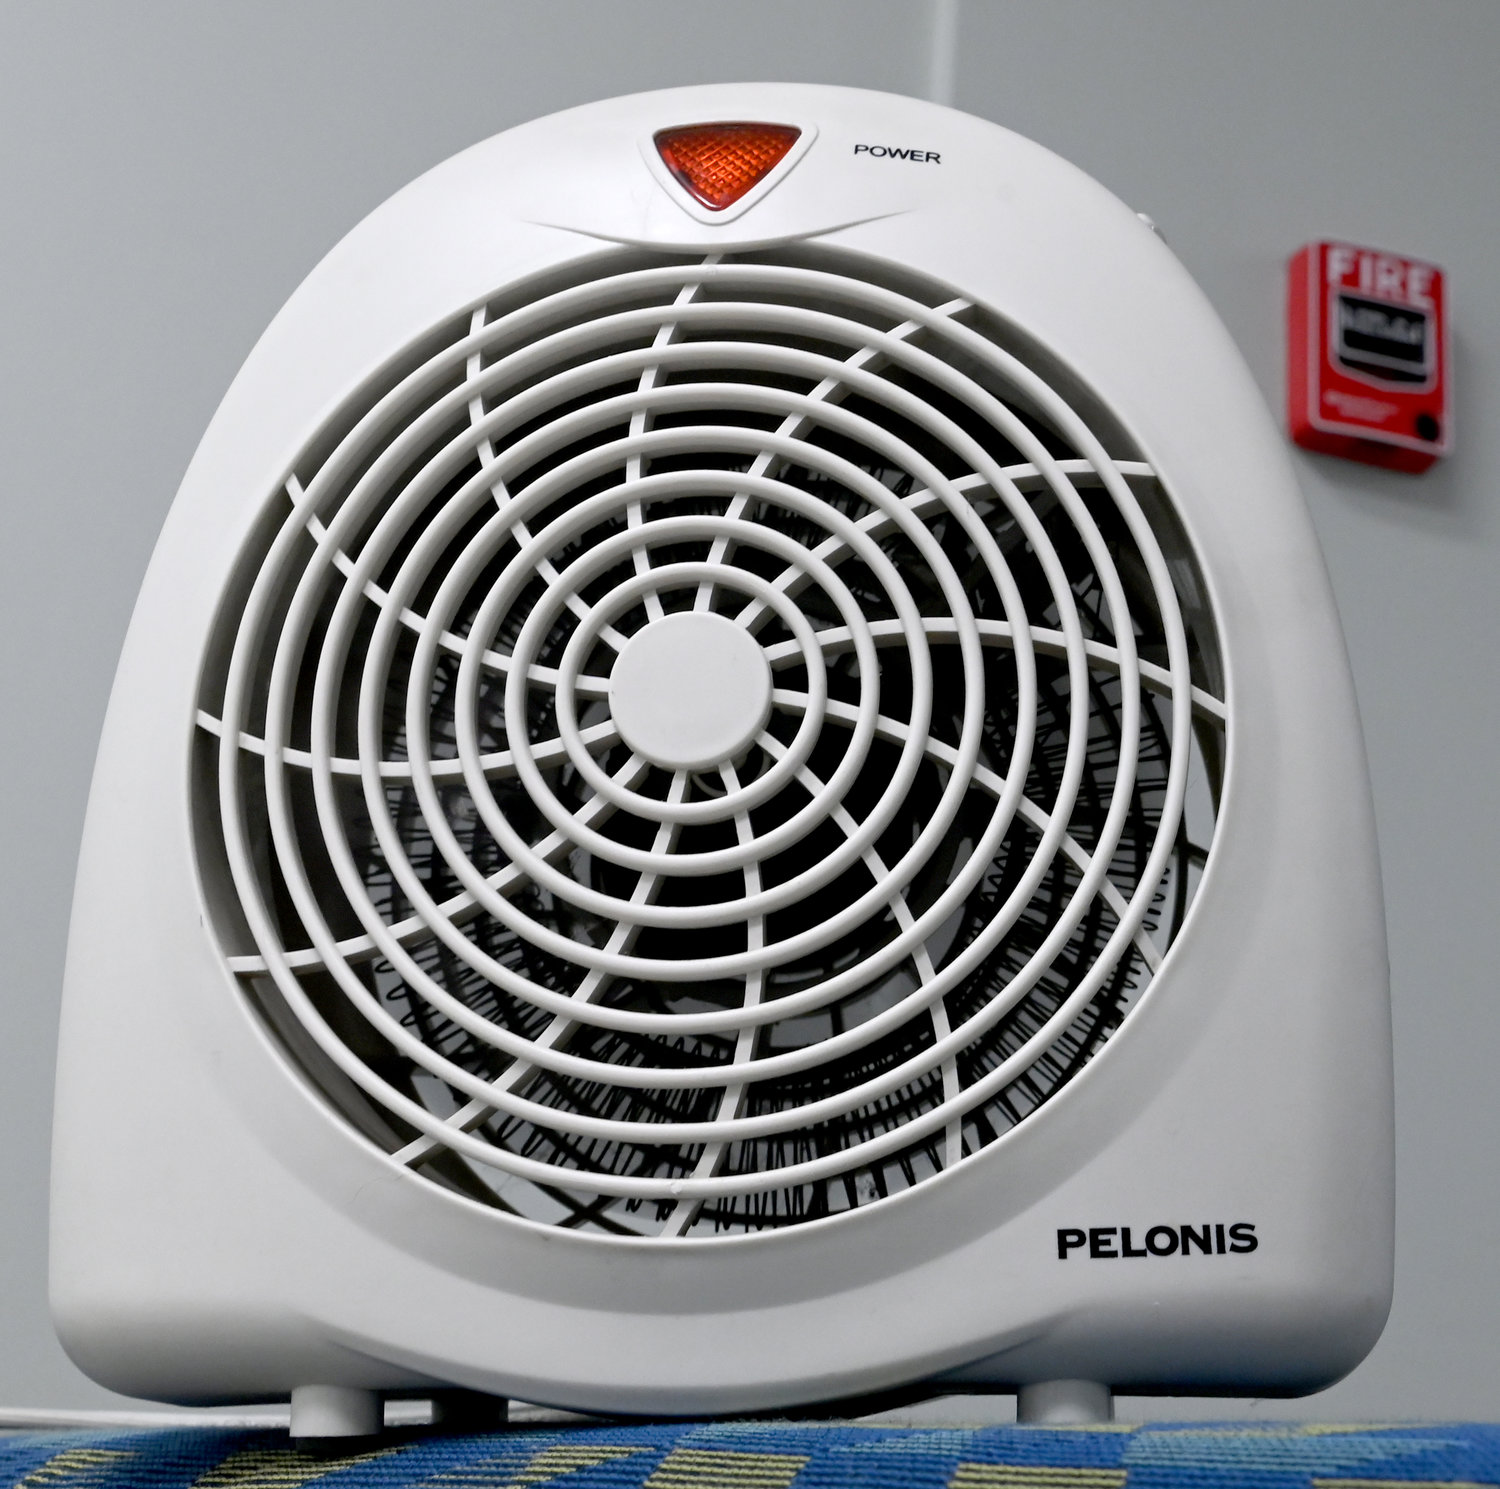 Firefighters urge residents who use space heaters to utilize proper precautions to reduce the risk of fires.